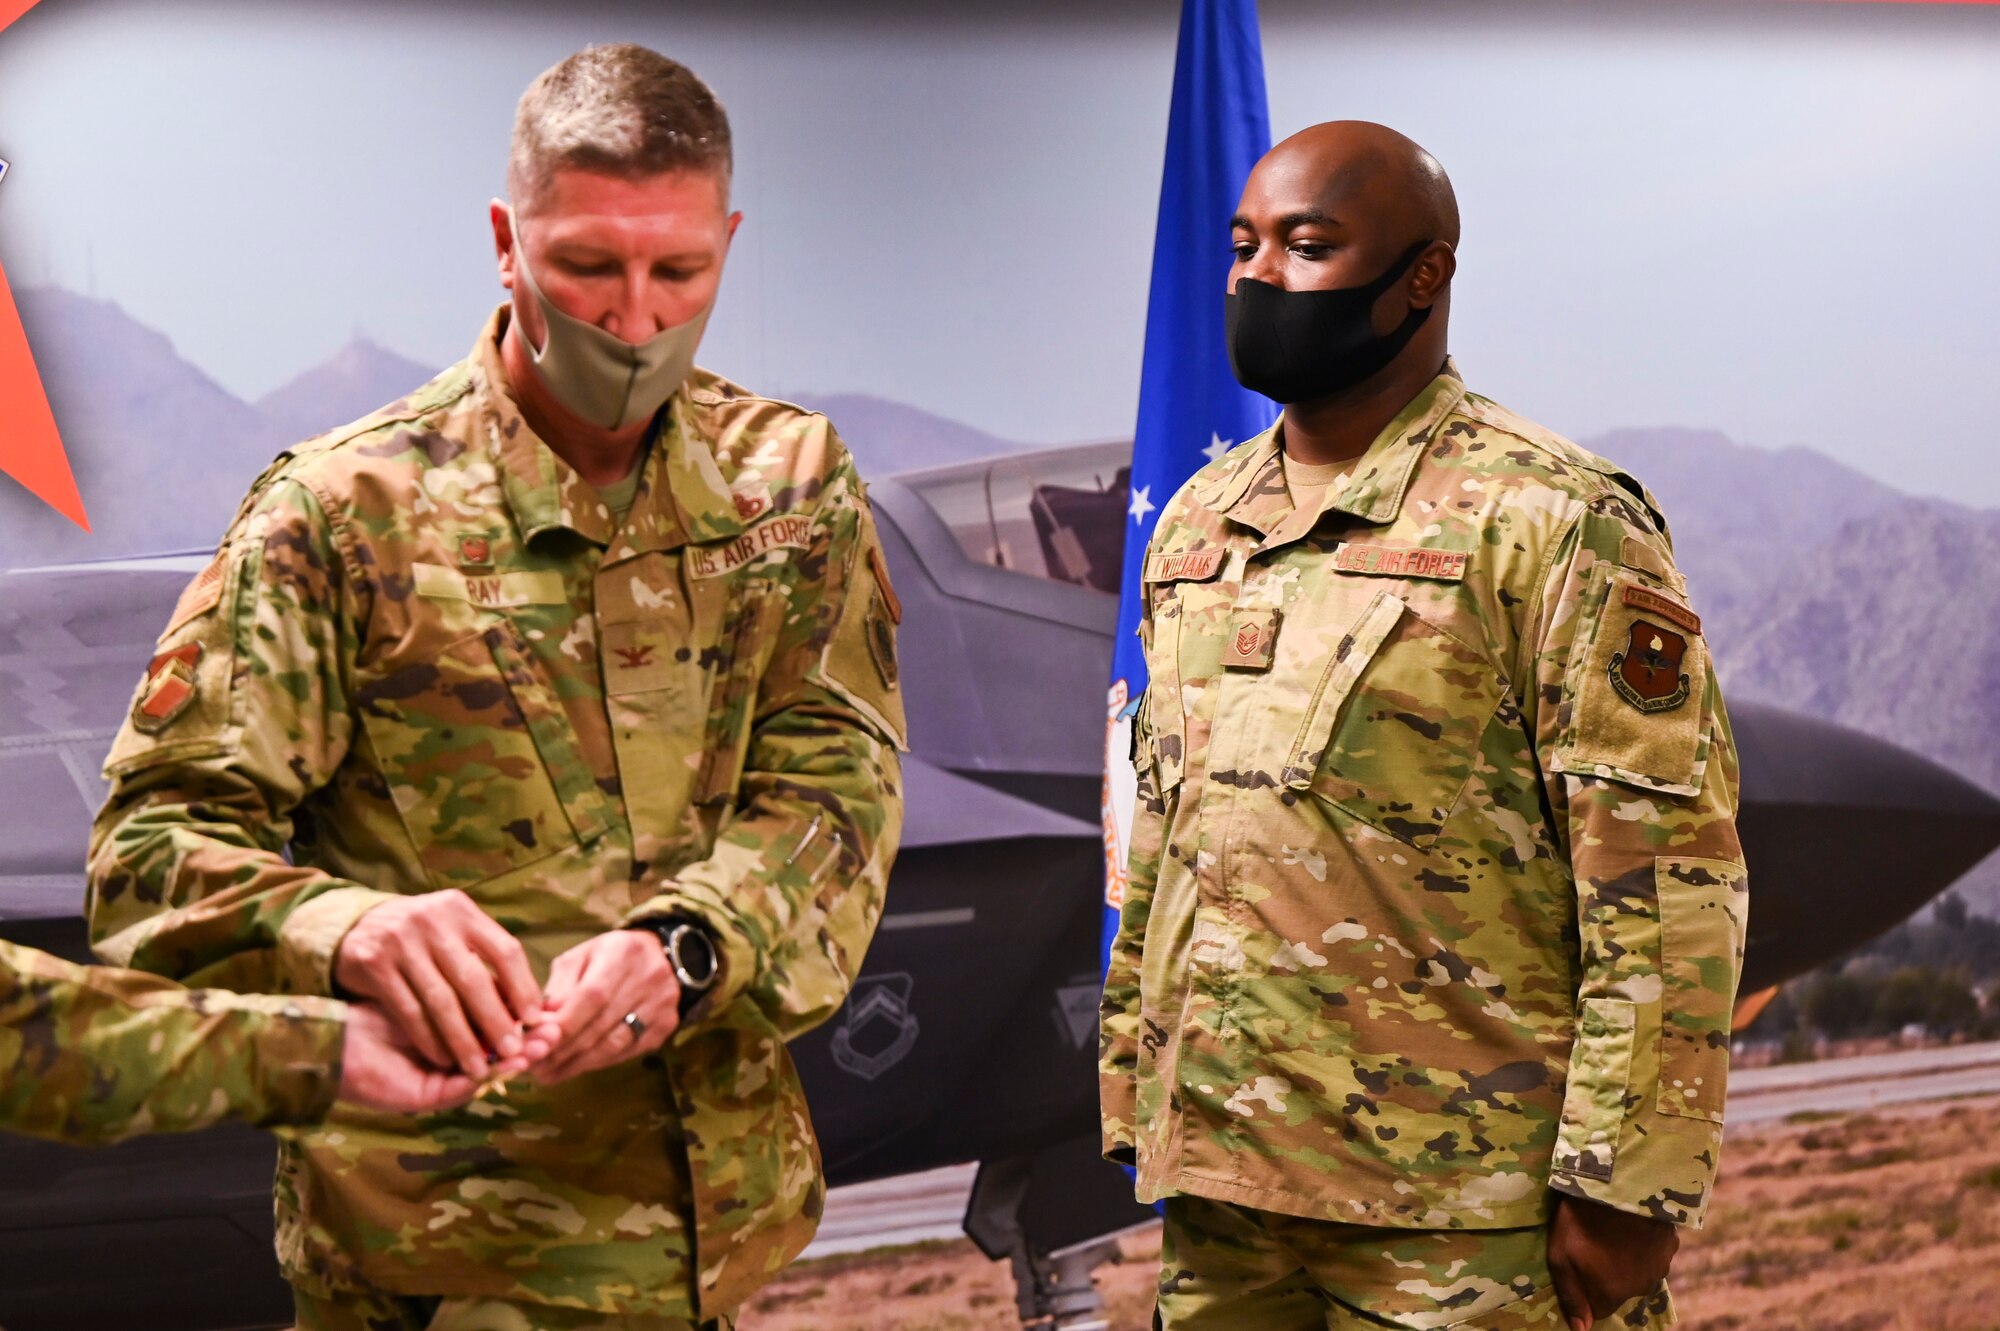 U.S. Air Force Col. William Ray, 56th Maintenance Group commander, awards the Bronze Star Medal to U.S. Air Force Master Sgt. Thomas Williams, 62nd Aircraft Maintenance Unit weapons loading non-commissioned officer in charge, for meritorious achievement Sept. 1, 2021, at Luke Air Force Base, Arizona.